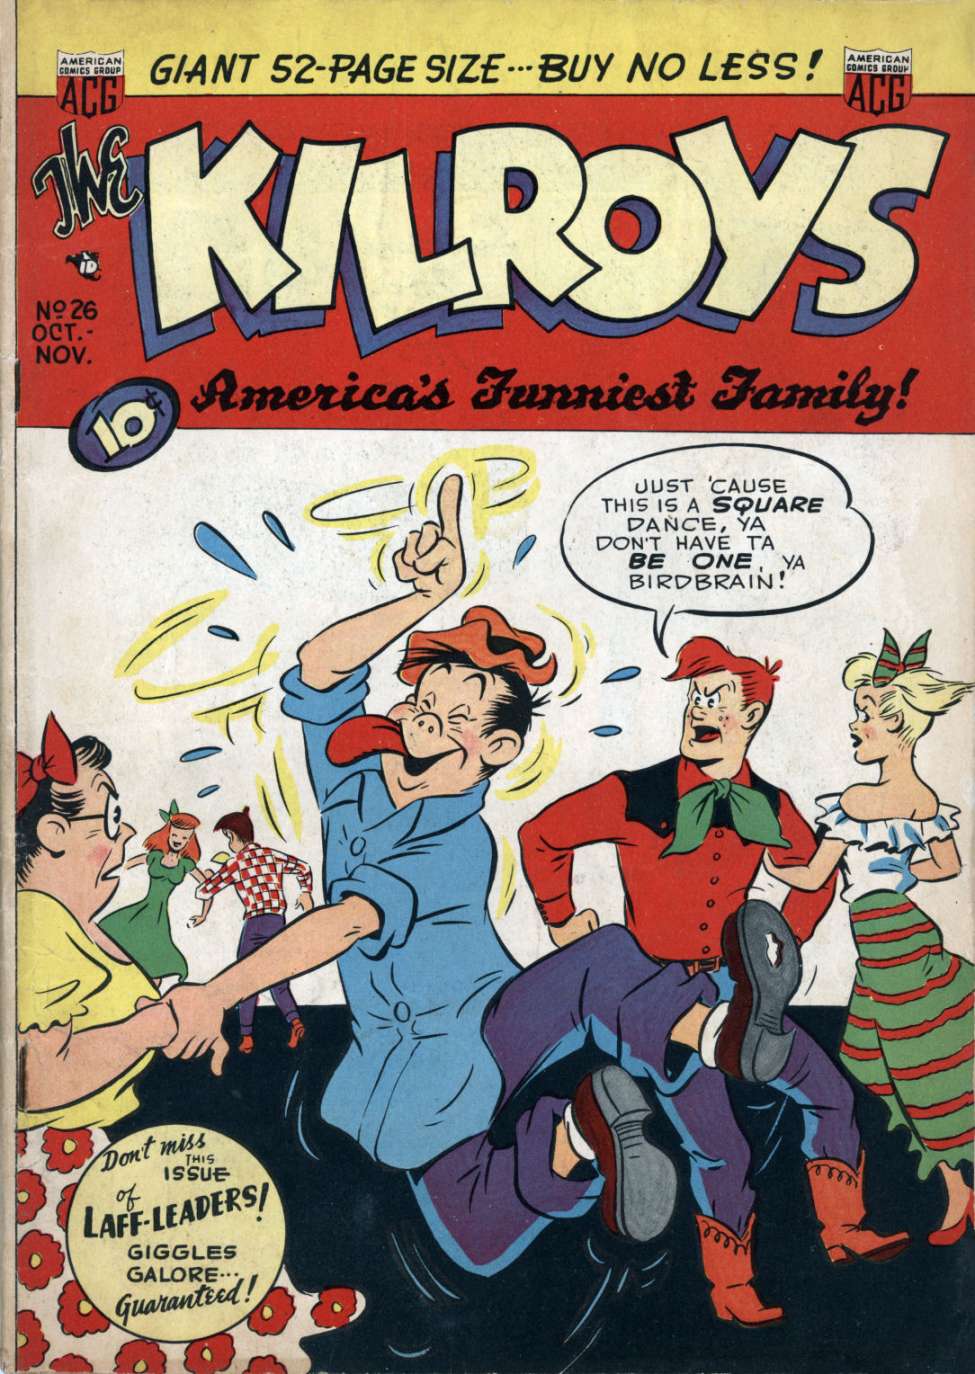 Comic Book Cover For The Kilroys 26